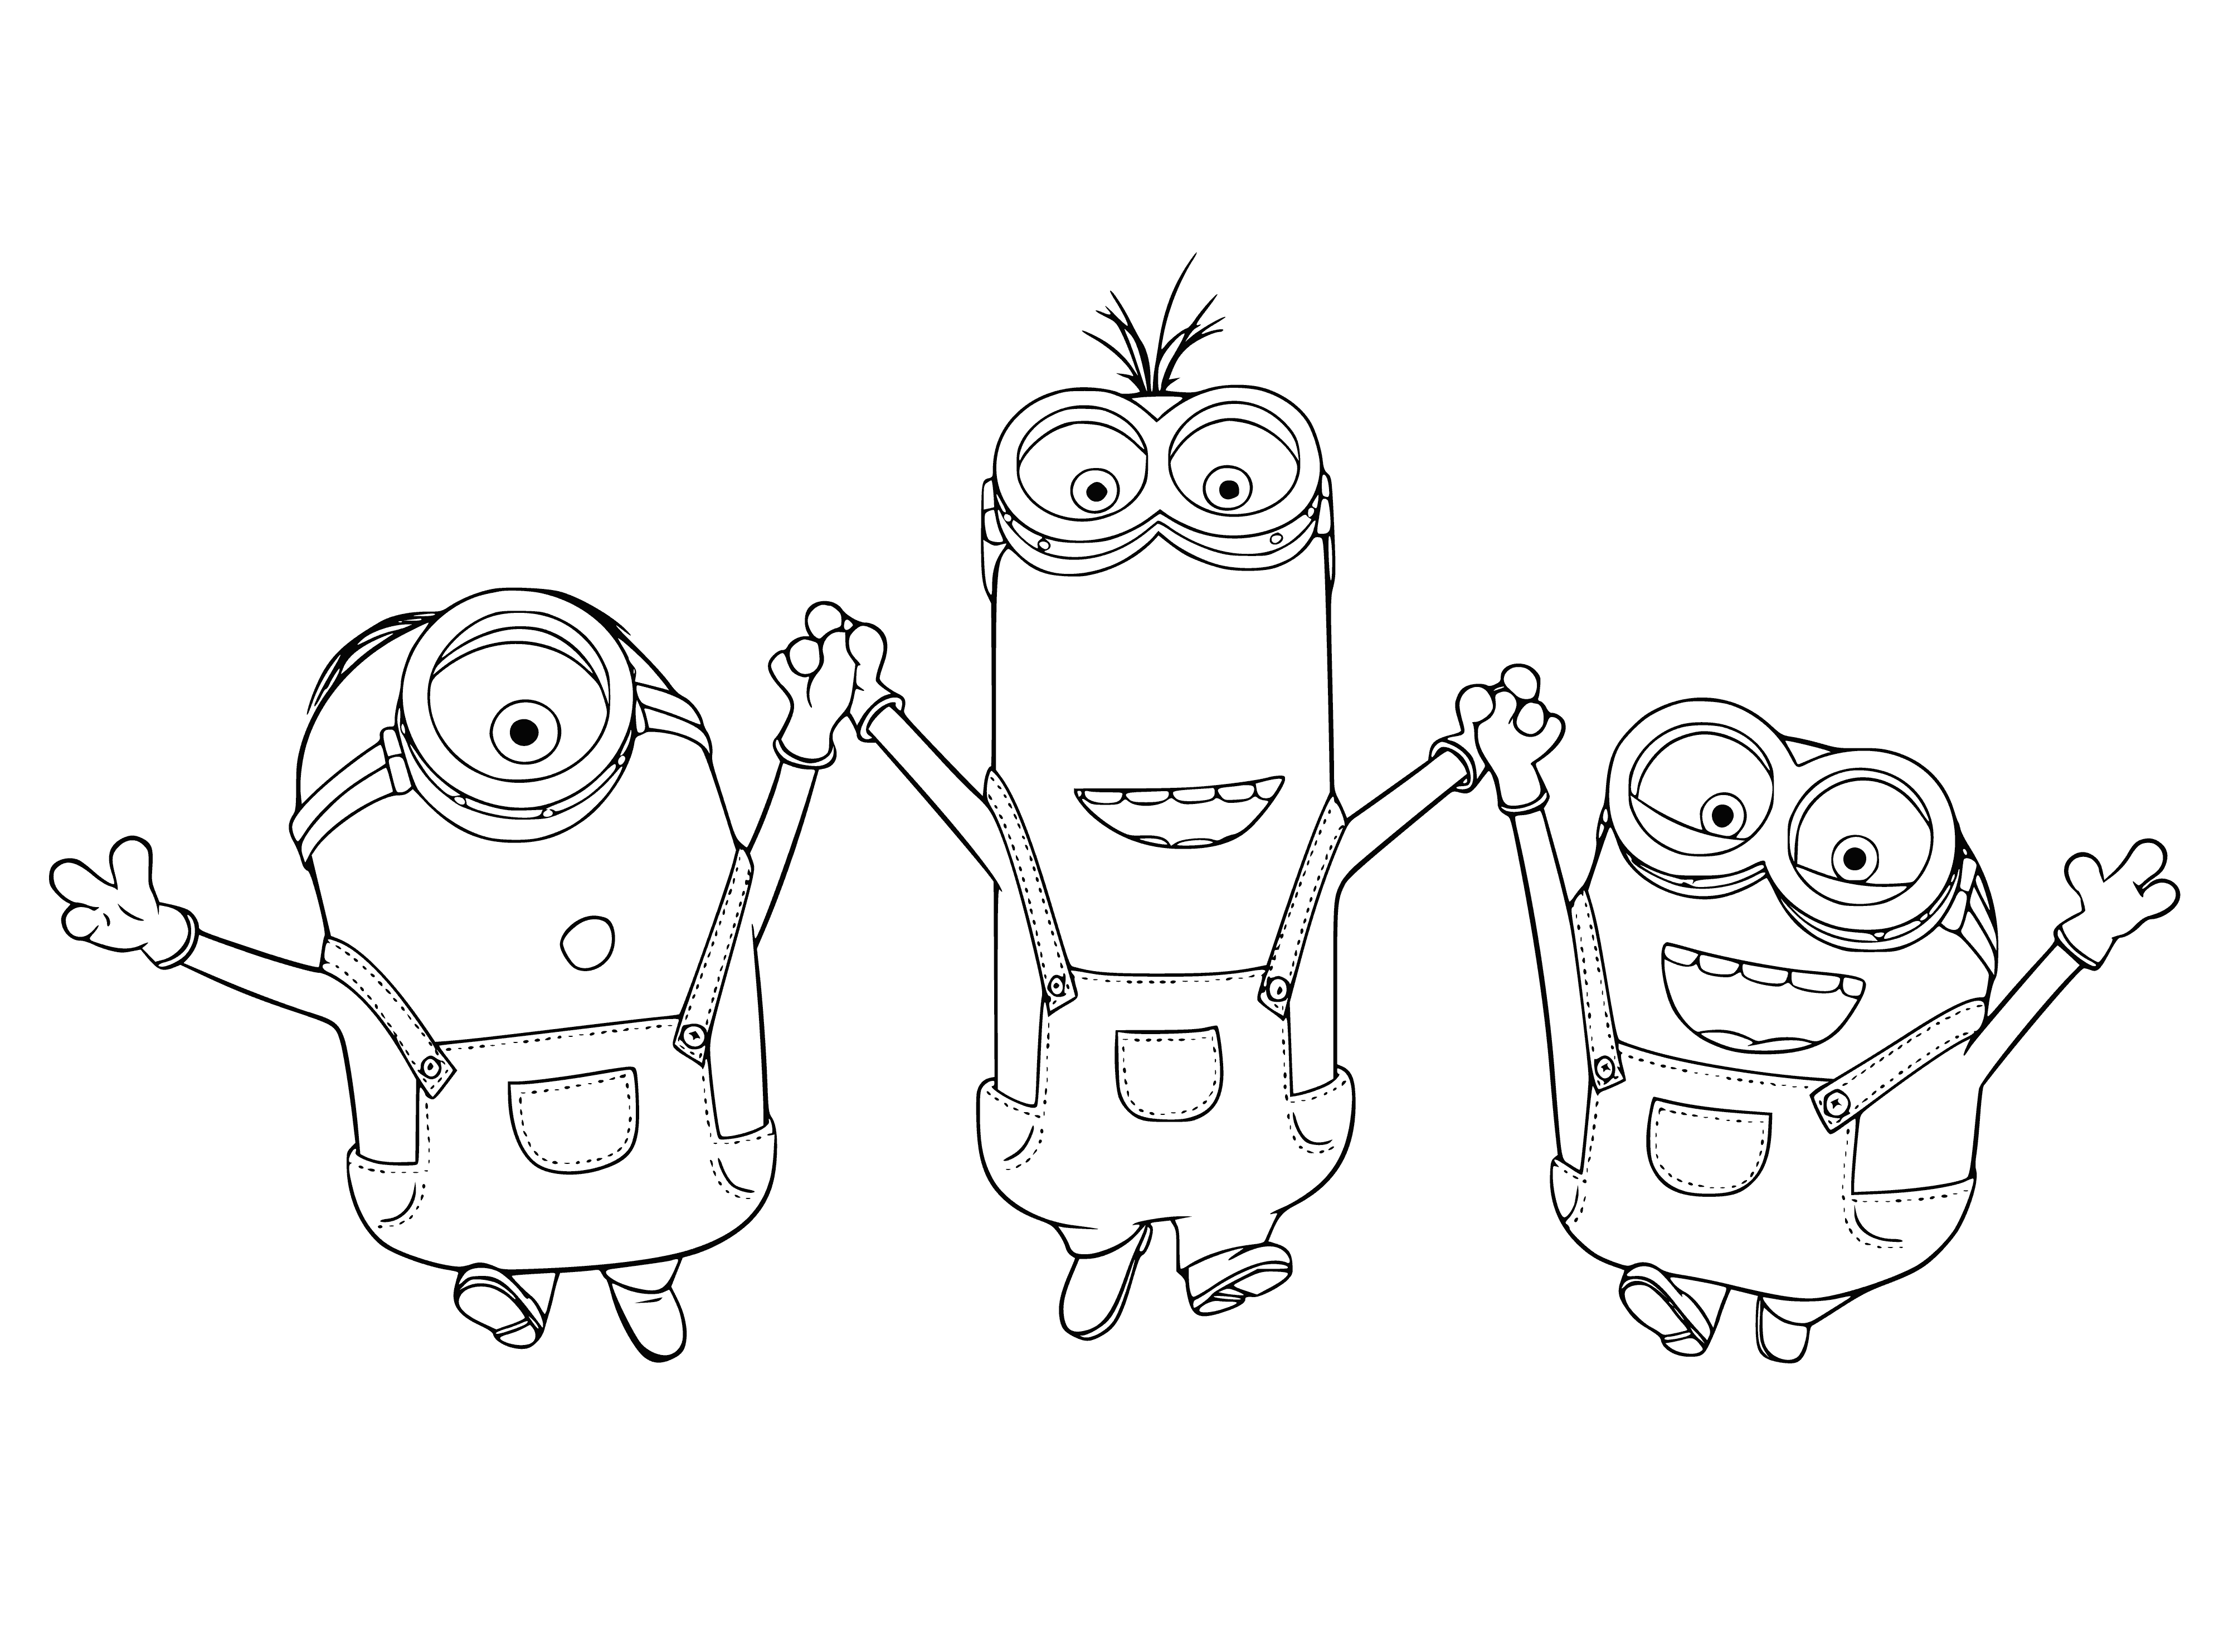 coloring page: Three Minions, in blue, yellow, and green, stand next to each other wearing goggles and two eyes.